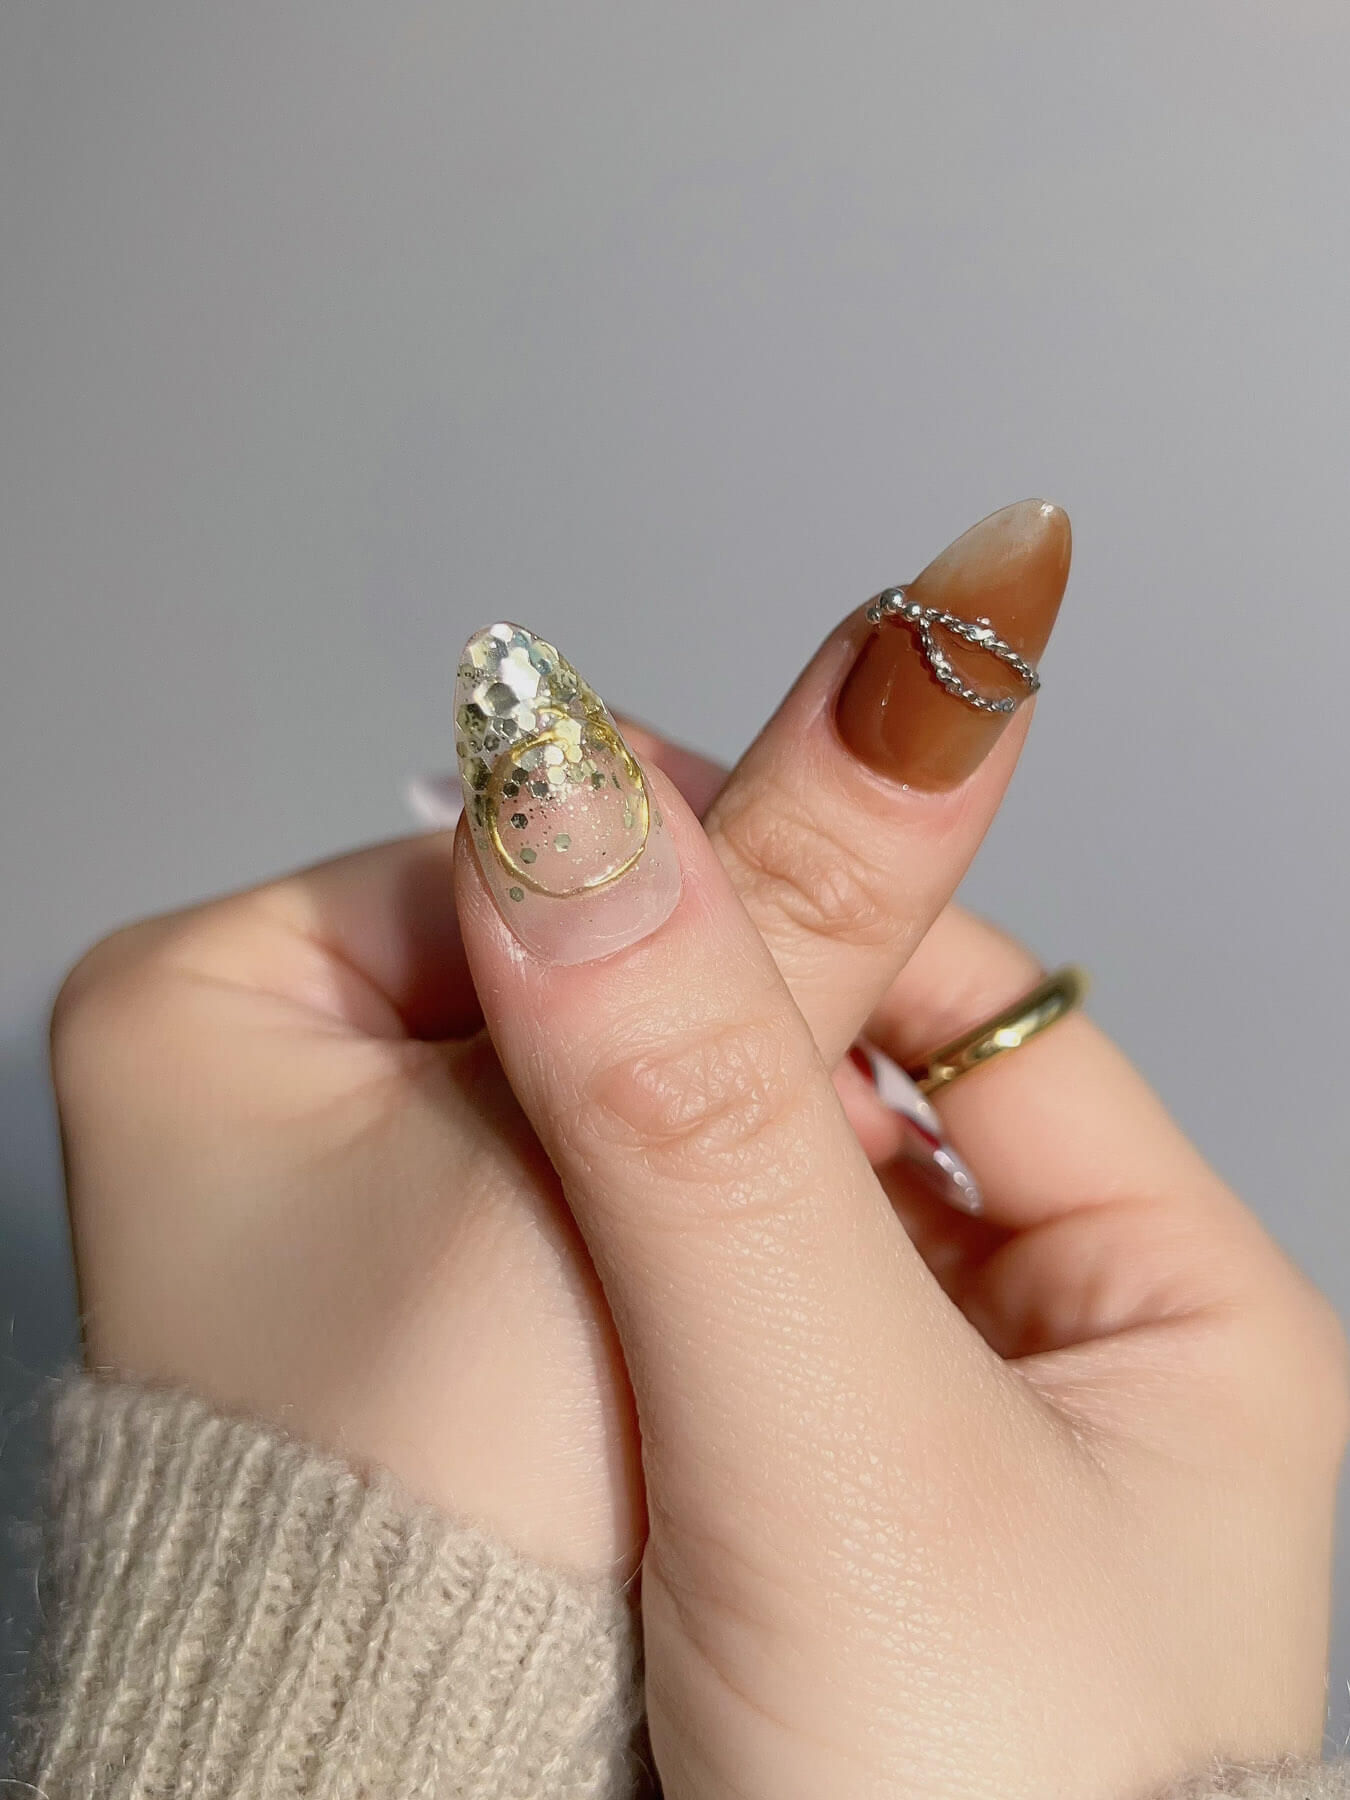 handmade- gold sequins plaid pattern gold trimmed cat's eye press on nails